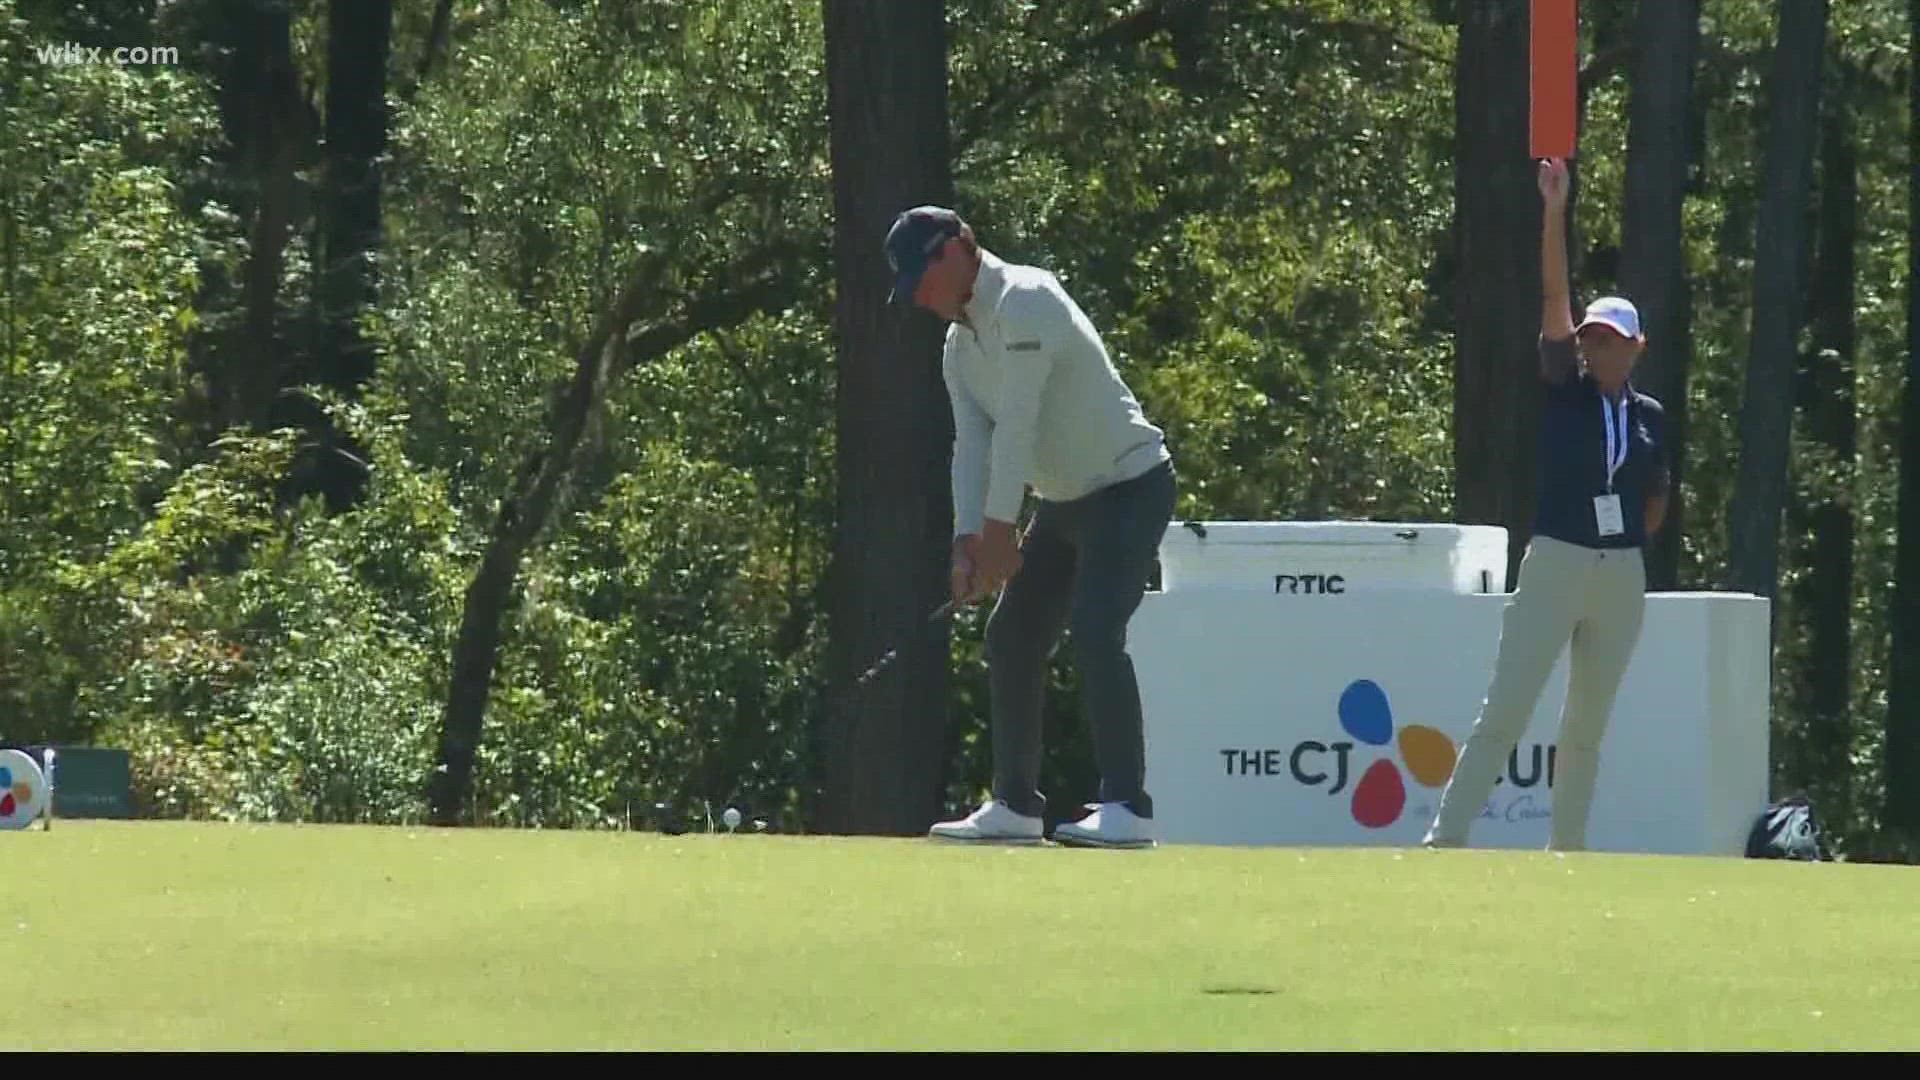 A solid start for Lucas Glover in the CJ Cup wltx